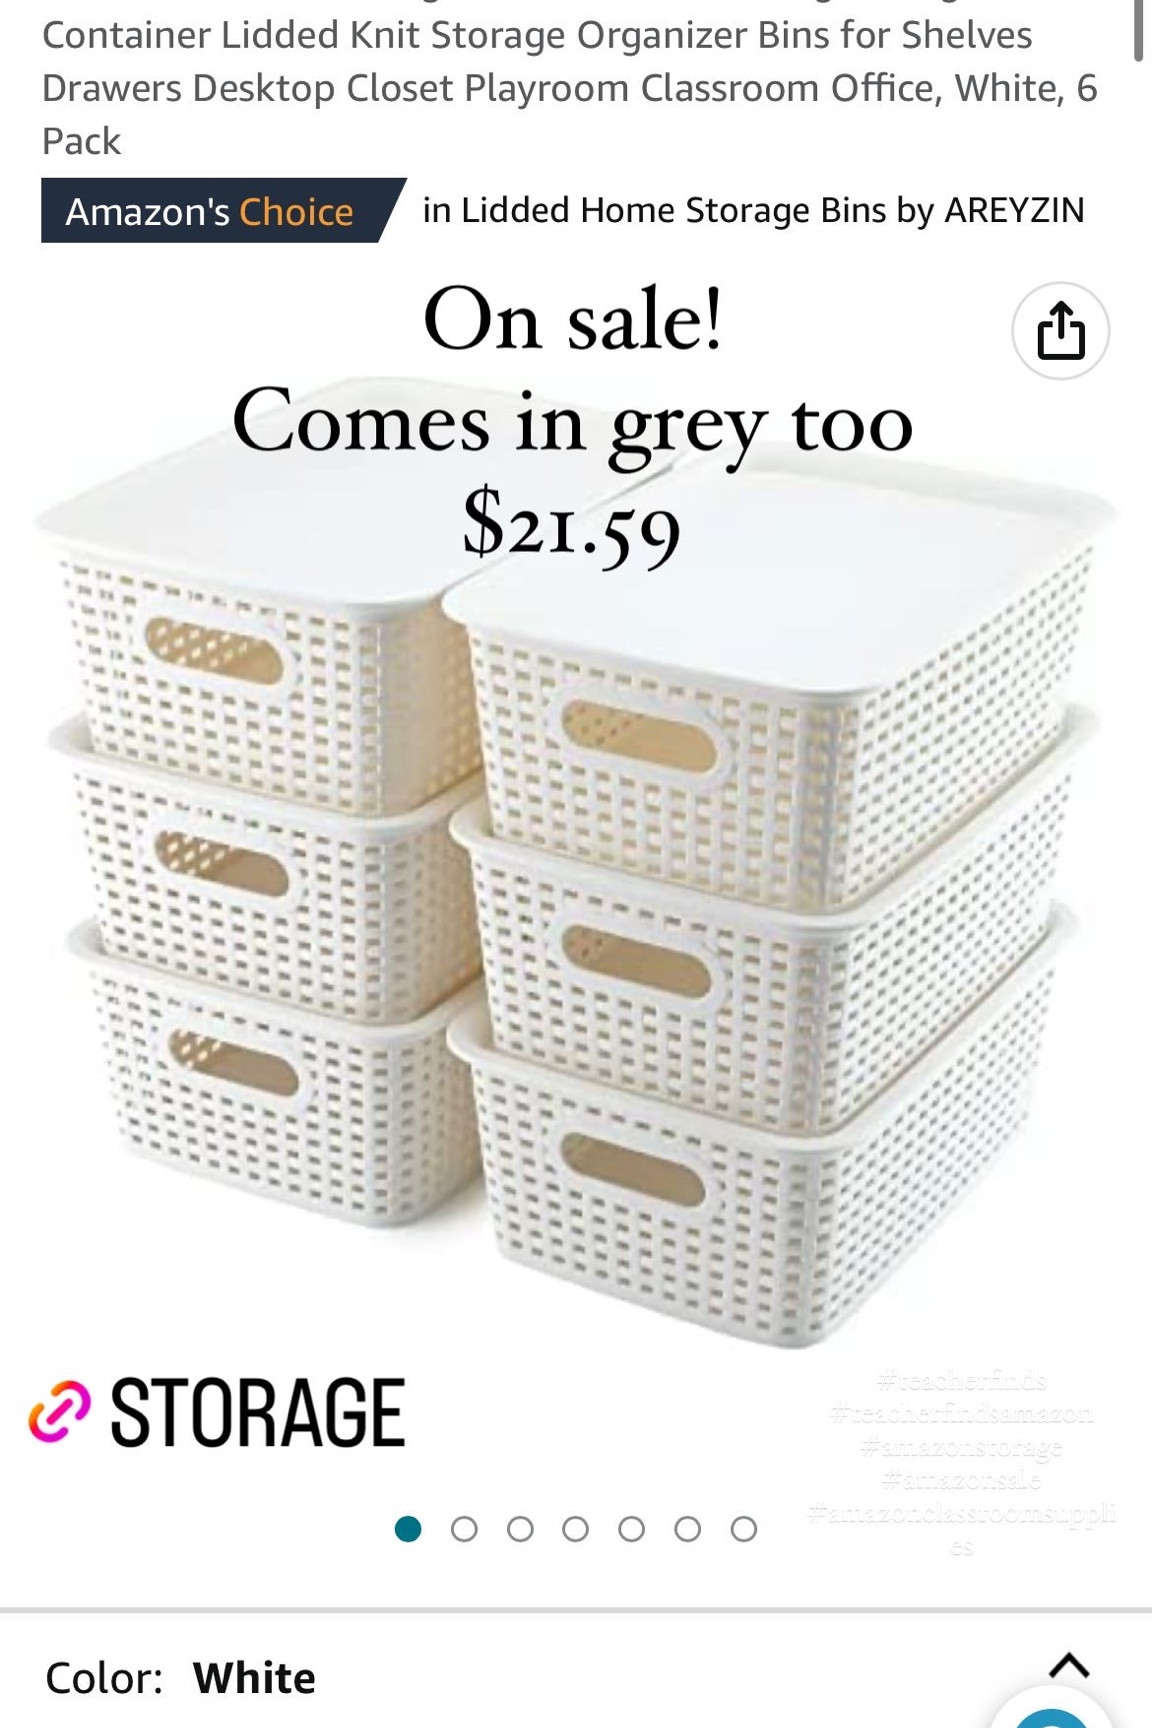  AREYZIN Plastic Storage Bins With Lid Set of 6 Baskets for  Organizing Container Lidded Organizer Shelves Drawers Desktop Closet  Playroom Classroom Office, White